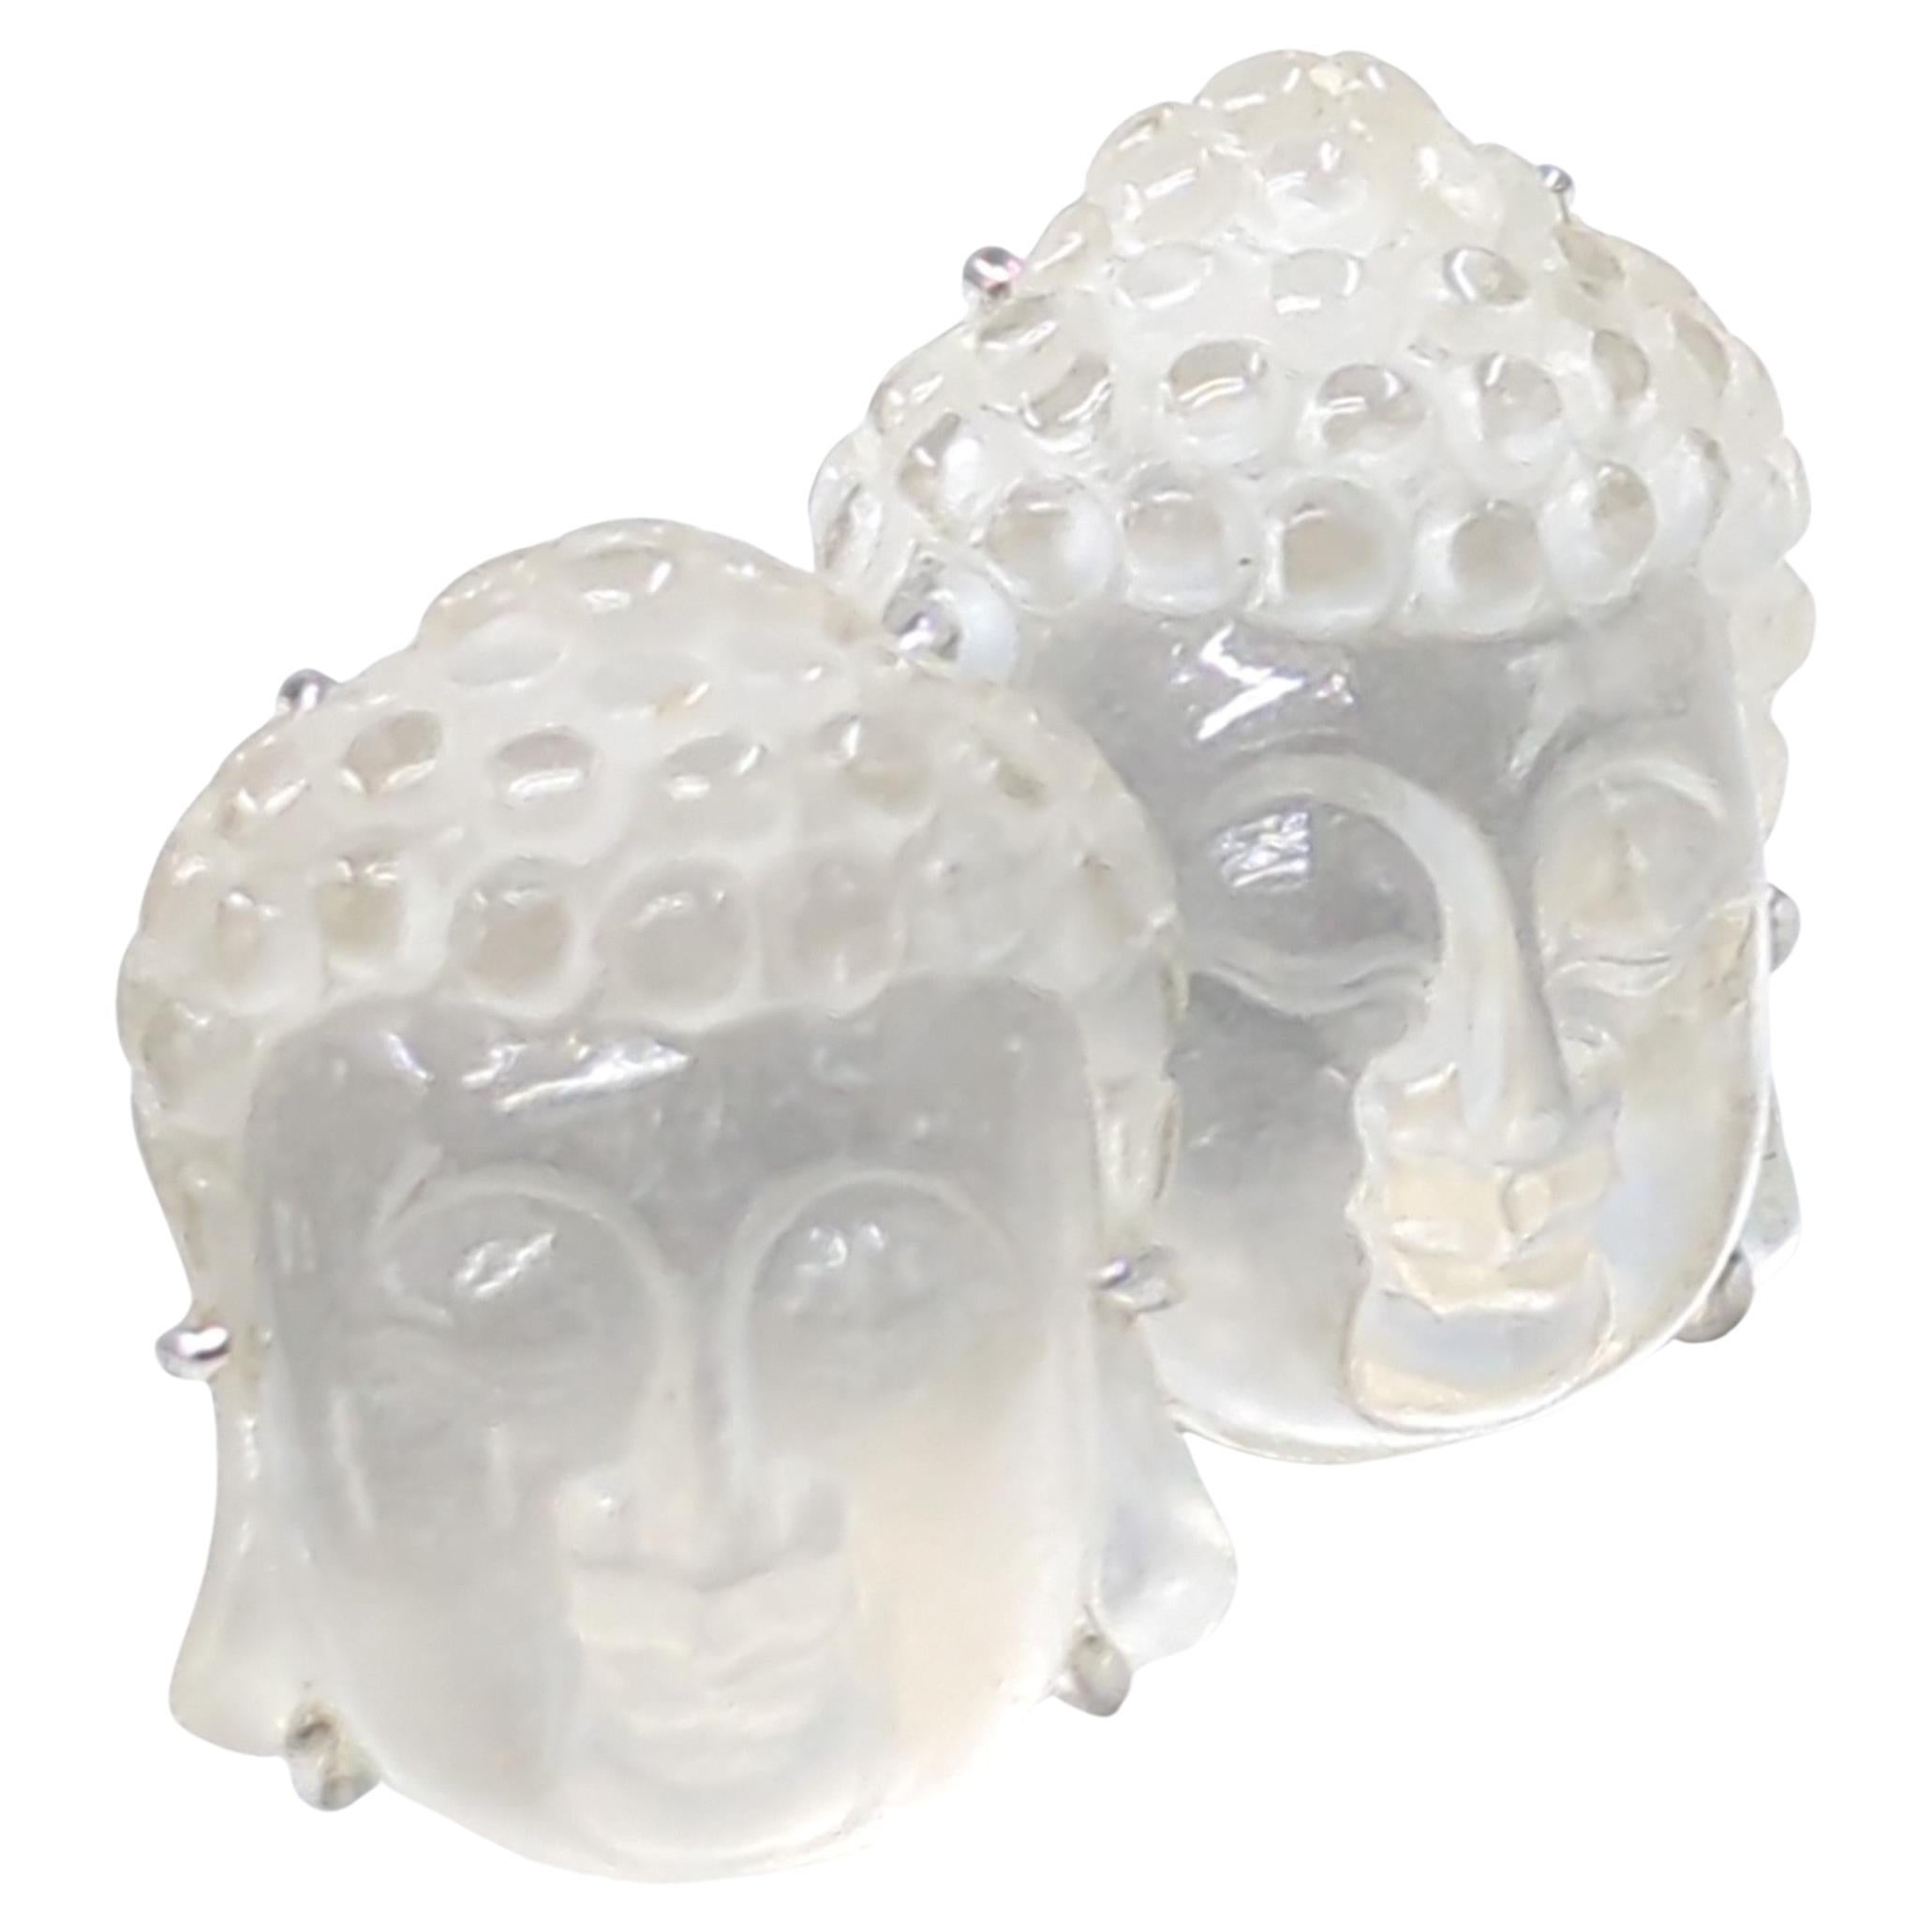 Rare 18k White Gold Carved Rock Crystal Buddha Head Cufflinks  For Sale